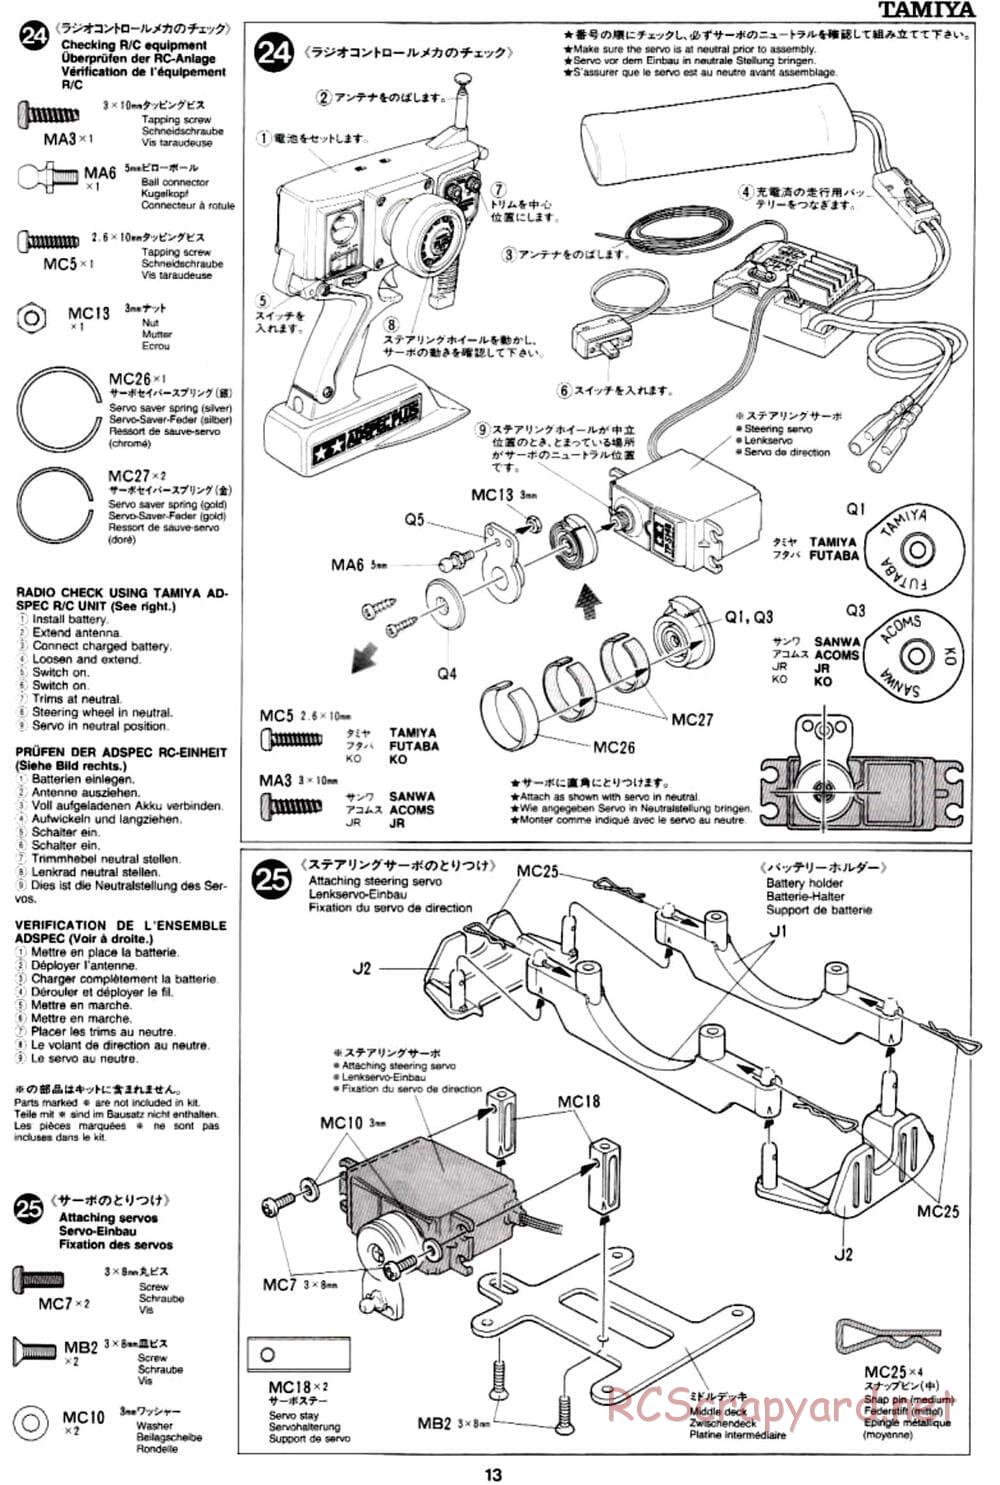 Tamiya - TA-03R TRF Special Edition Chassis - Manual - Page 13